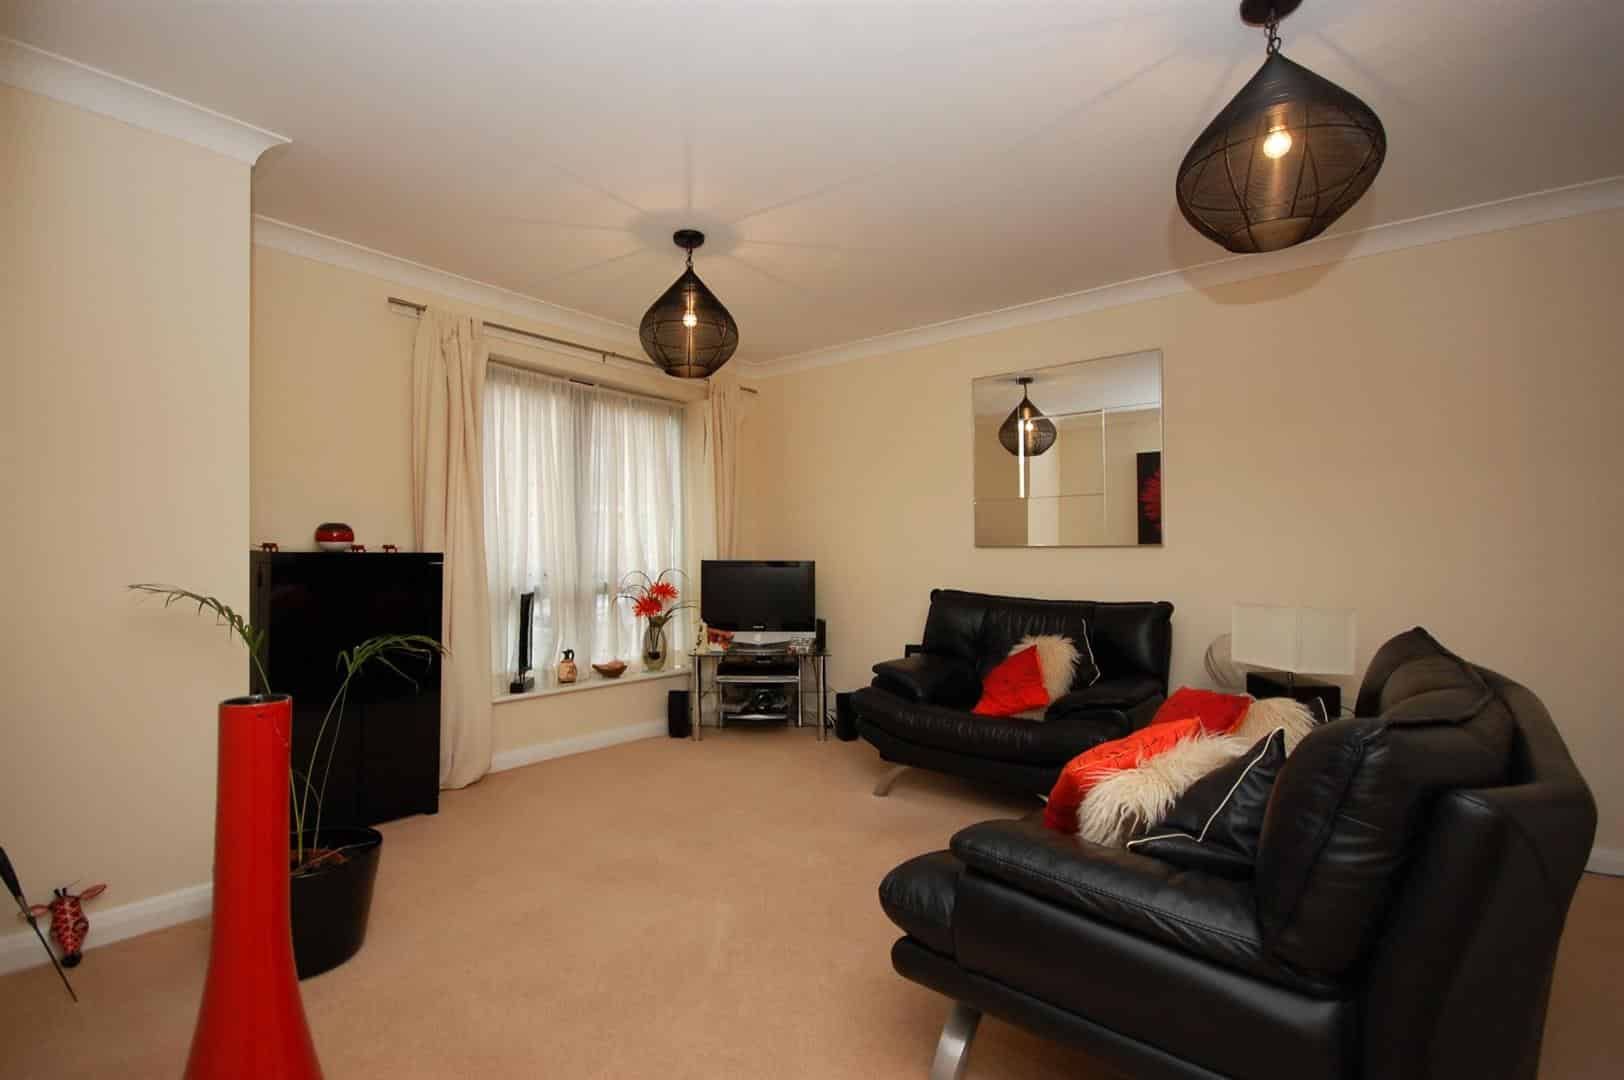 Loxley House, Hirst Crescent, Wembley, Middlesex, HA9 7HL